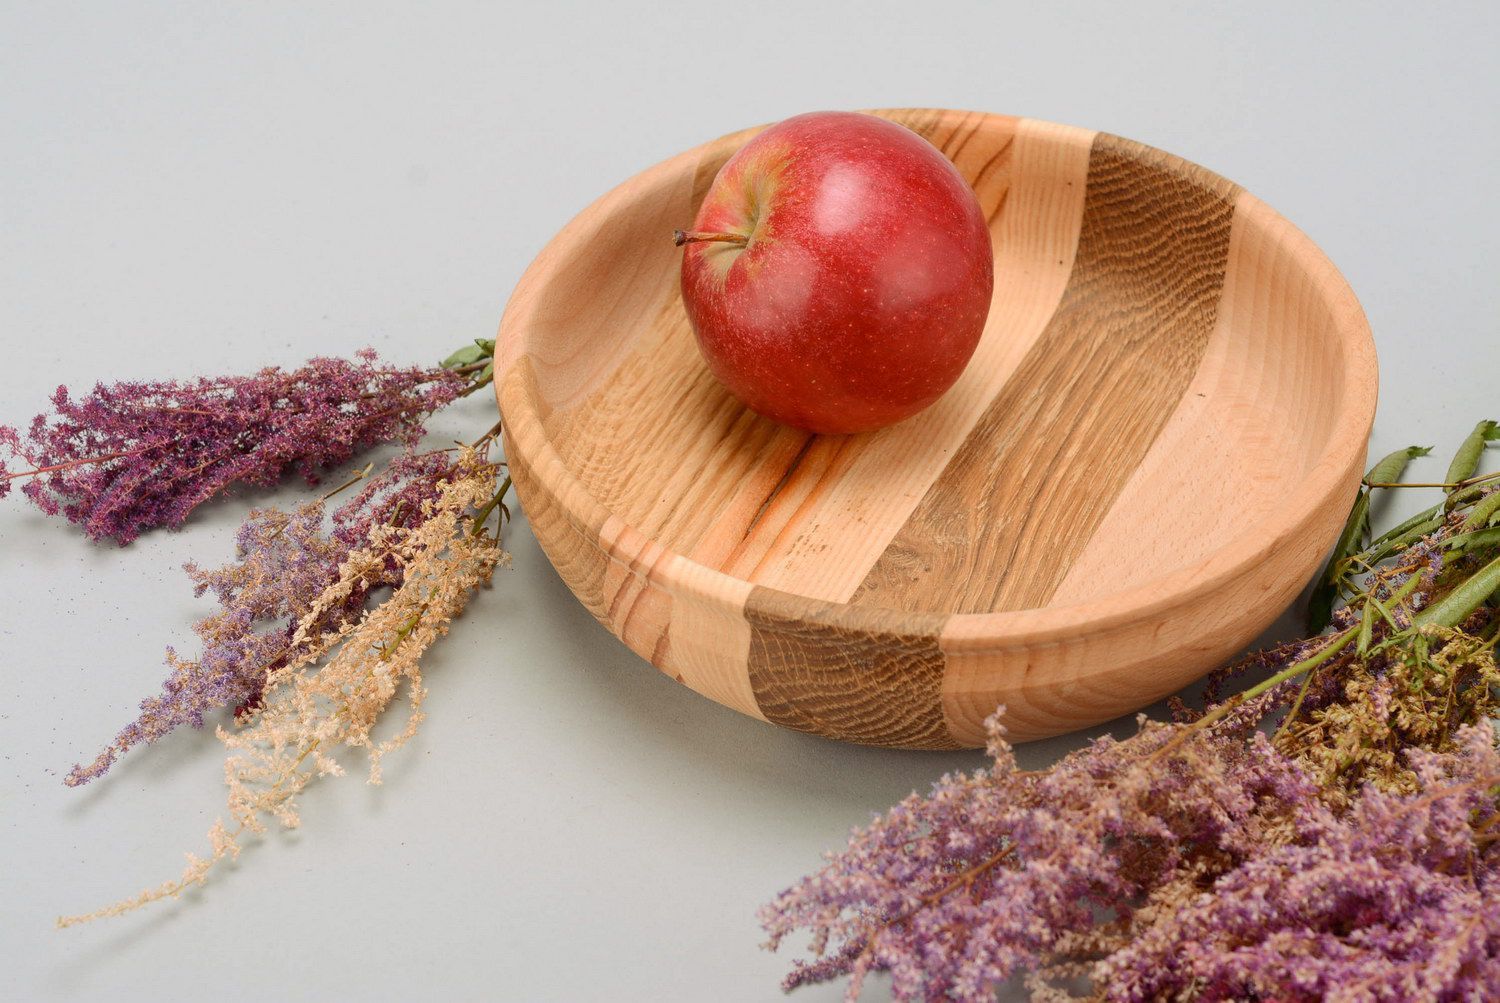 Wooden plate for dry products photo 1